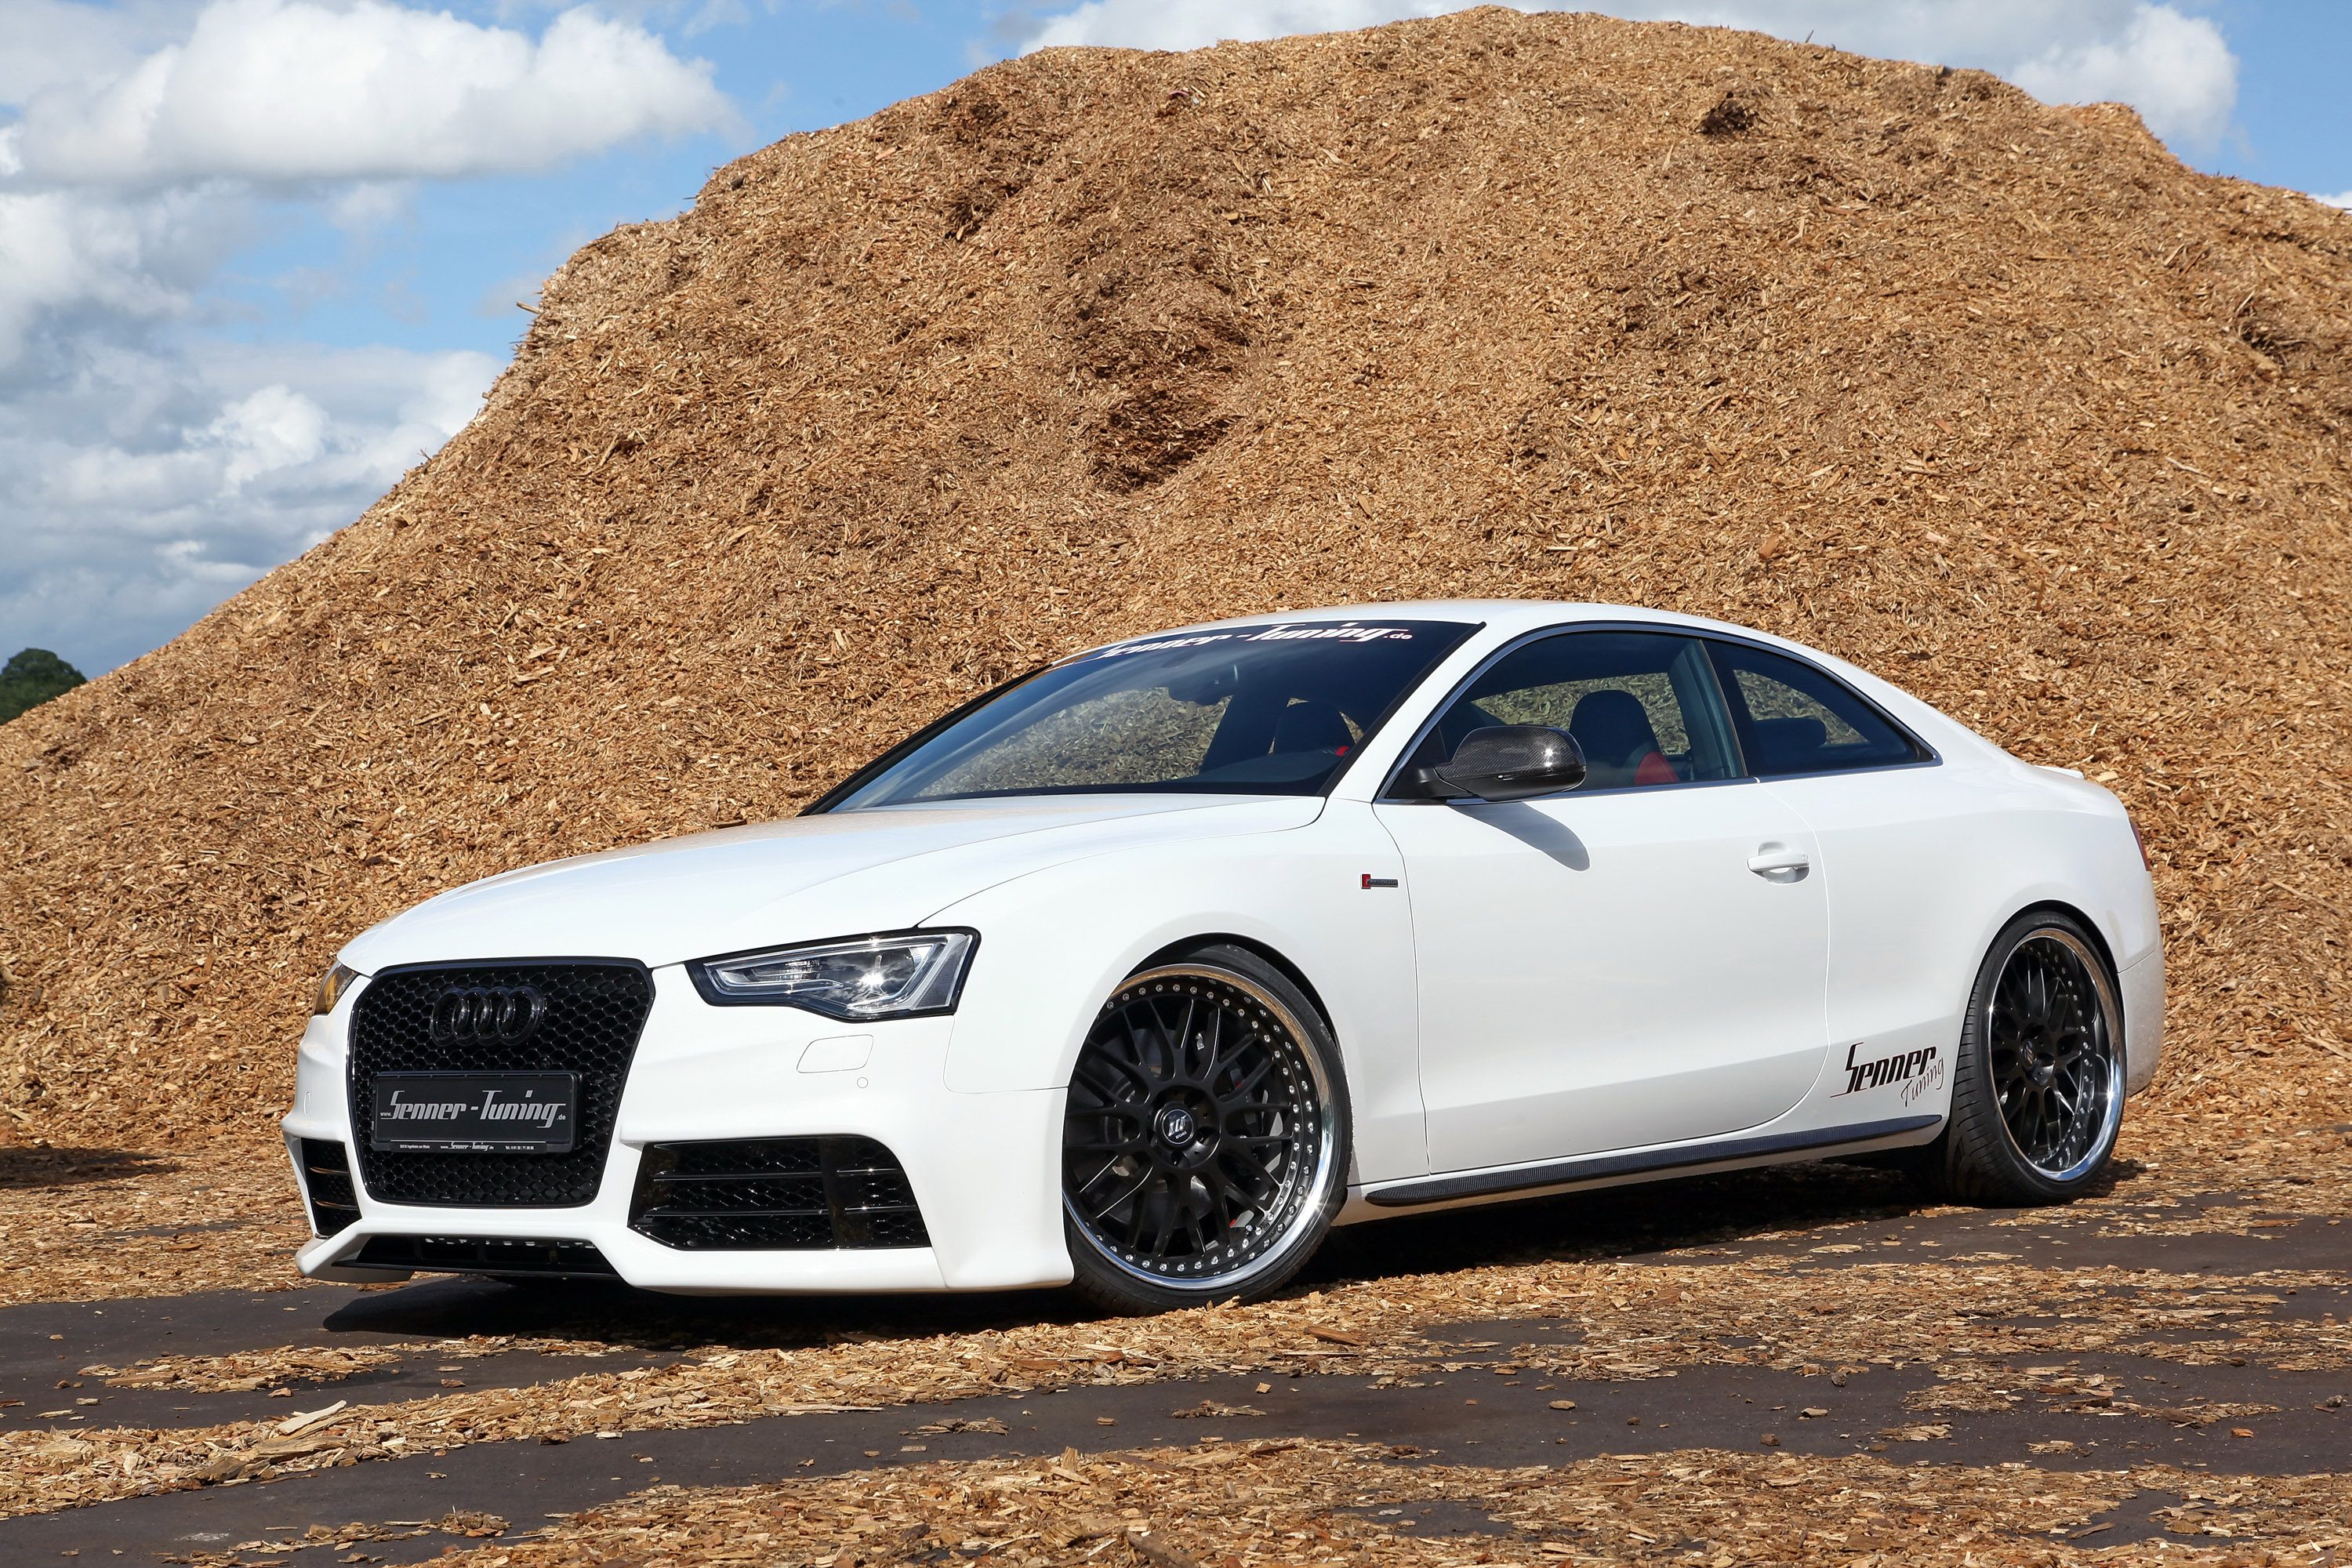 2012, Senner tuning, Audi, S 5, Coupe, Tuning Wallpaper